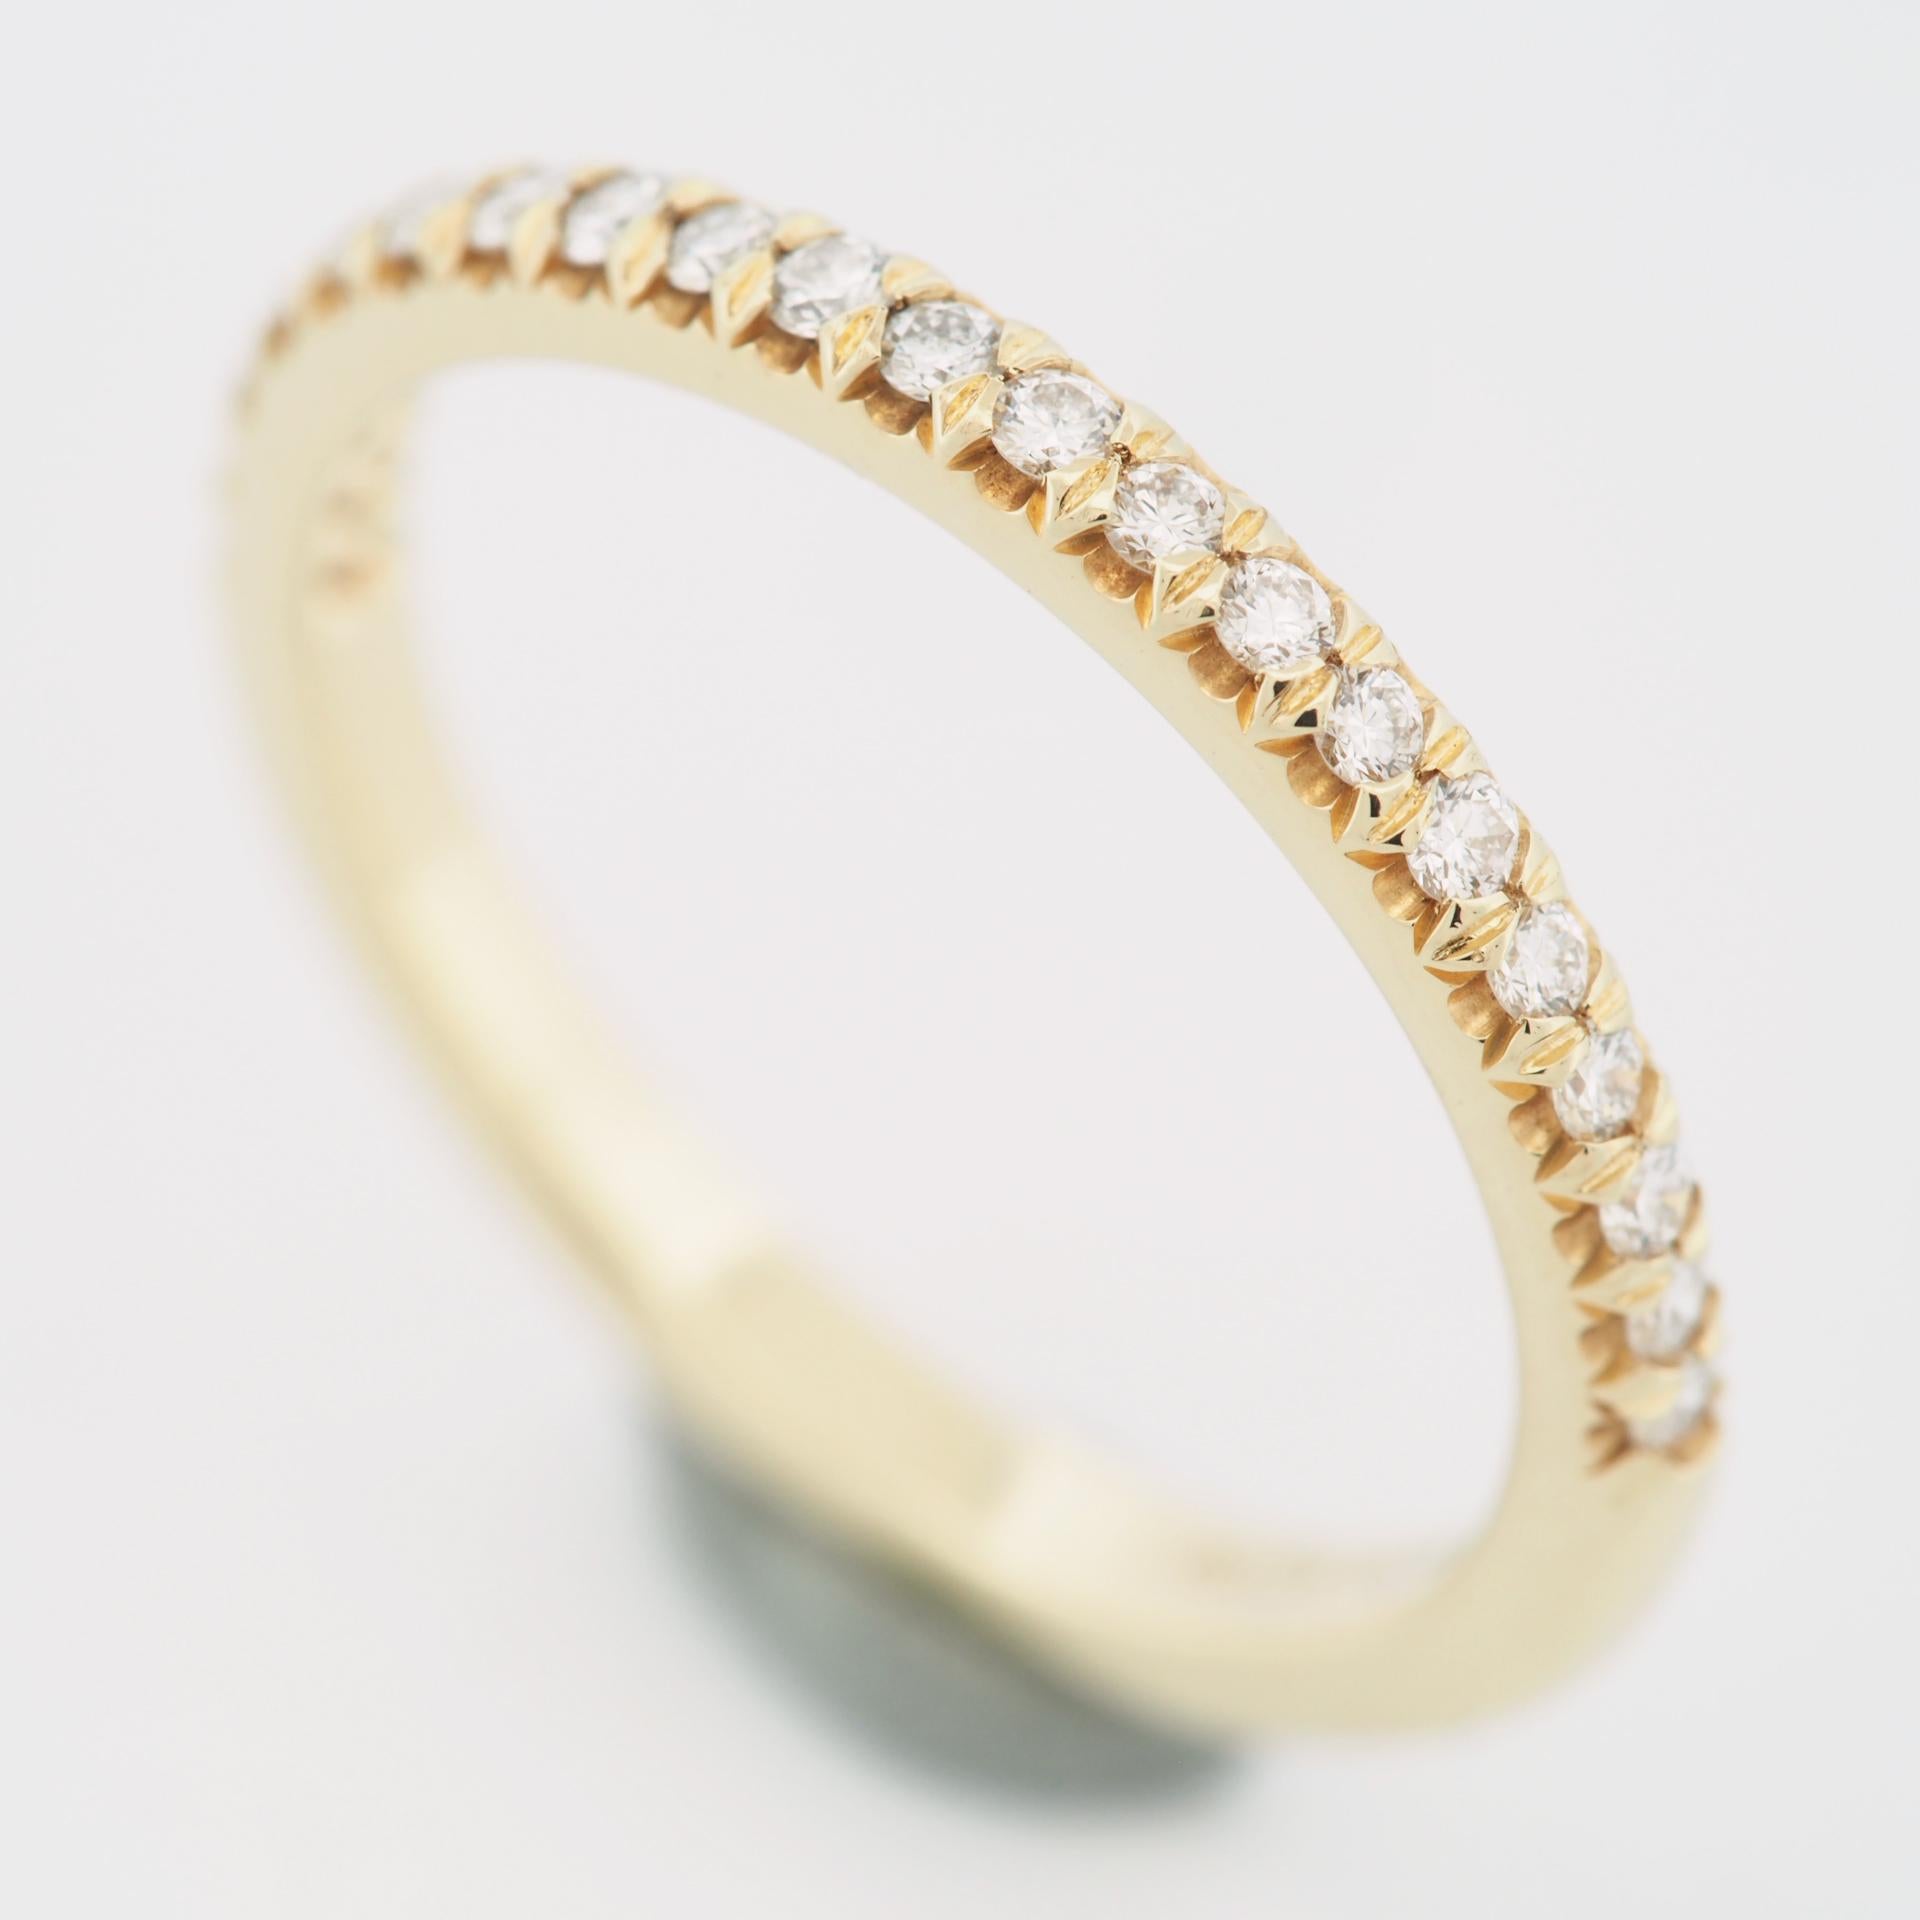 Item: Authentic Tiffany & Co. Soleste Half Eternity Diamonds Ring
Stones: Diamond ( 0.17ct )
Metal: 18K Yellow Gold
Ring Size: US SIZE 5.25 UK SIZE J 3/4
Internal Diameter: 15.85 mm
Measurement: 2.0 mm width
Weight: 2.3 Grams
Condition: Used